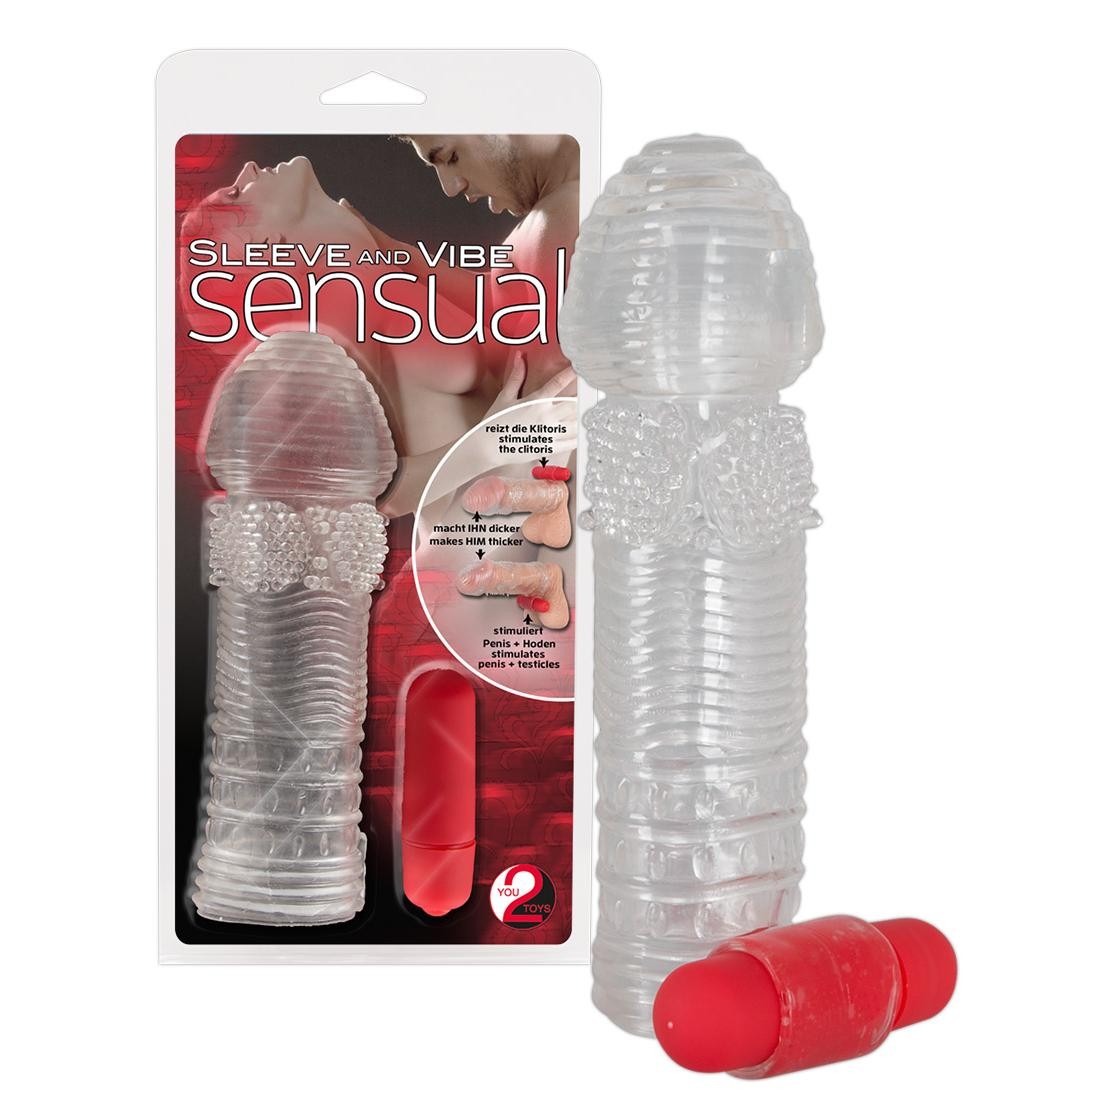  You2Toys  -  Sleeve  and  Vibe  sensual  -  Penissleeve 